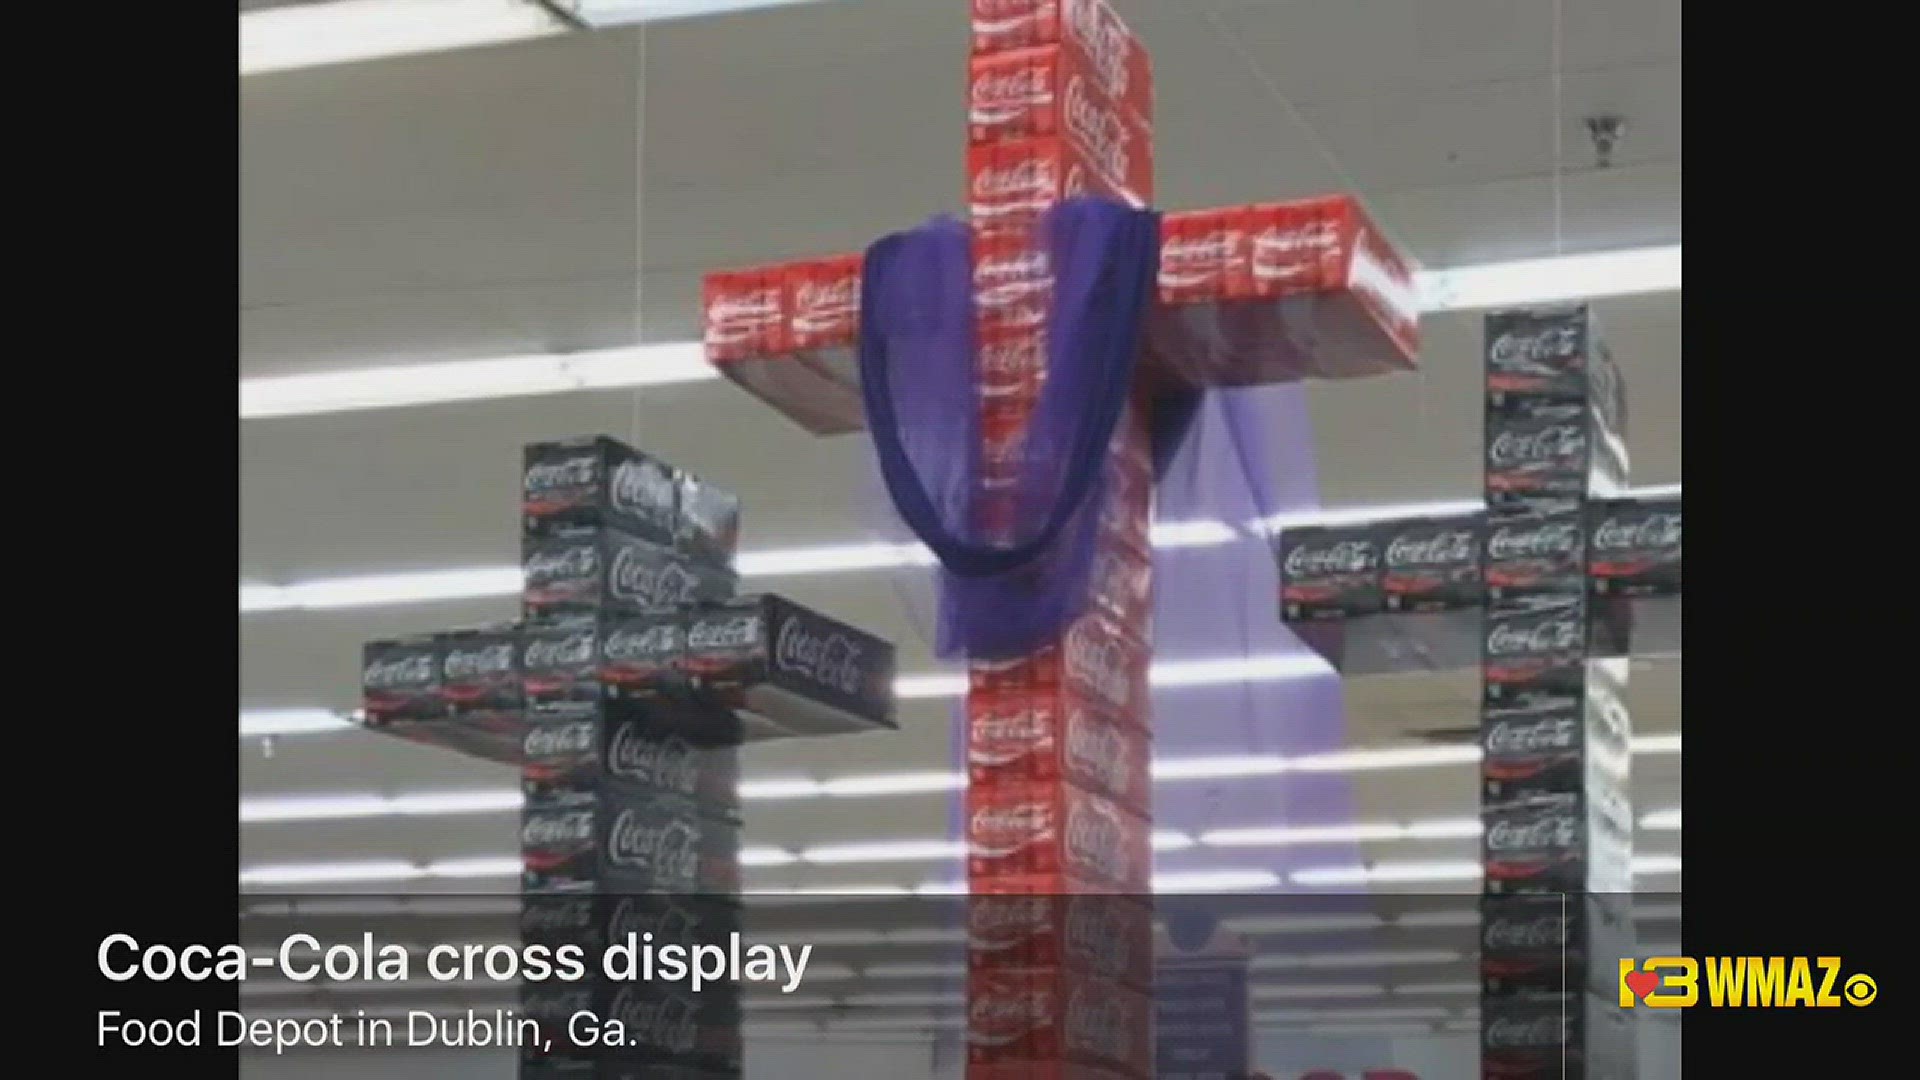 Some Coca-Cola displays around central Georgia have lately been showing the South's patriotism and Christian faith.